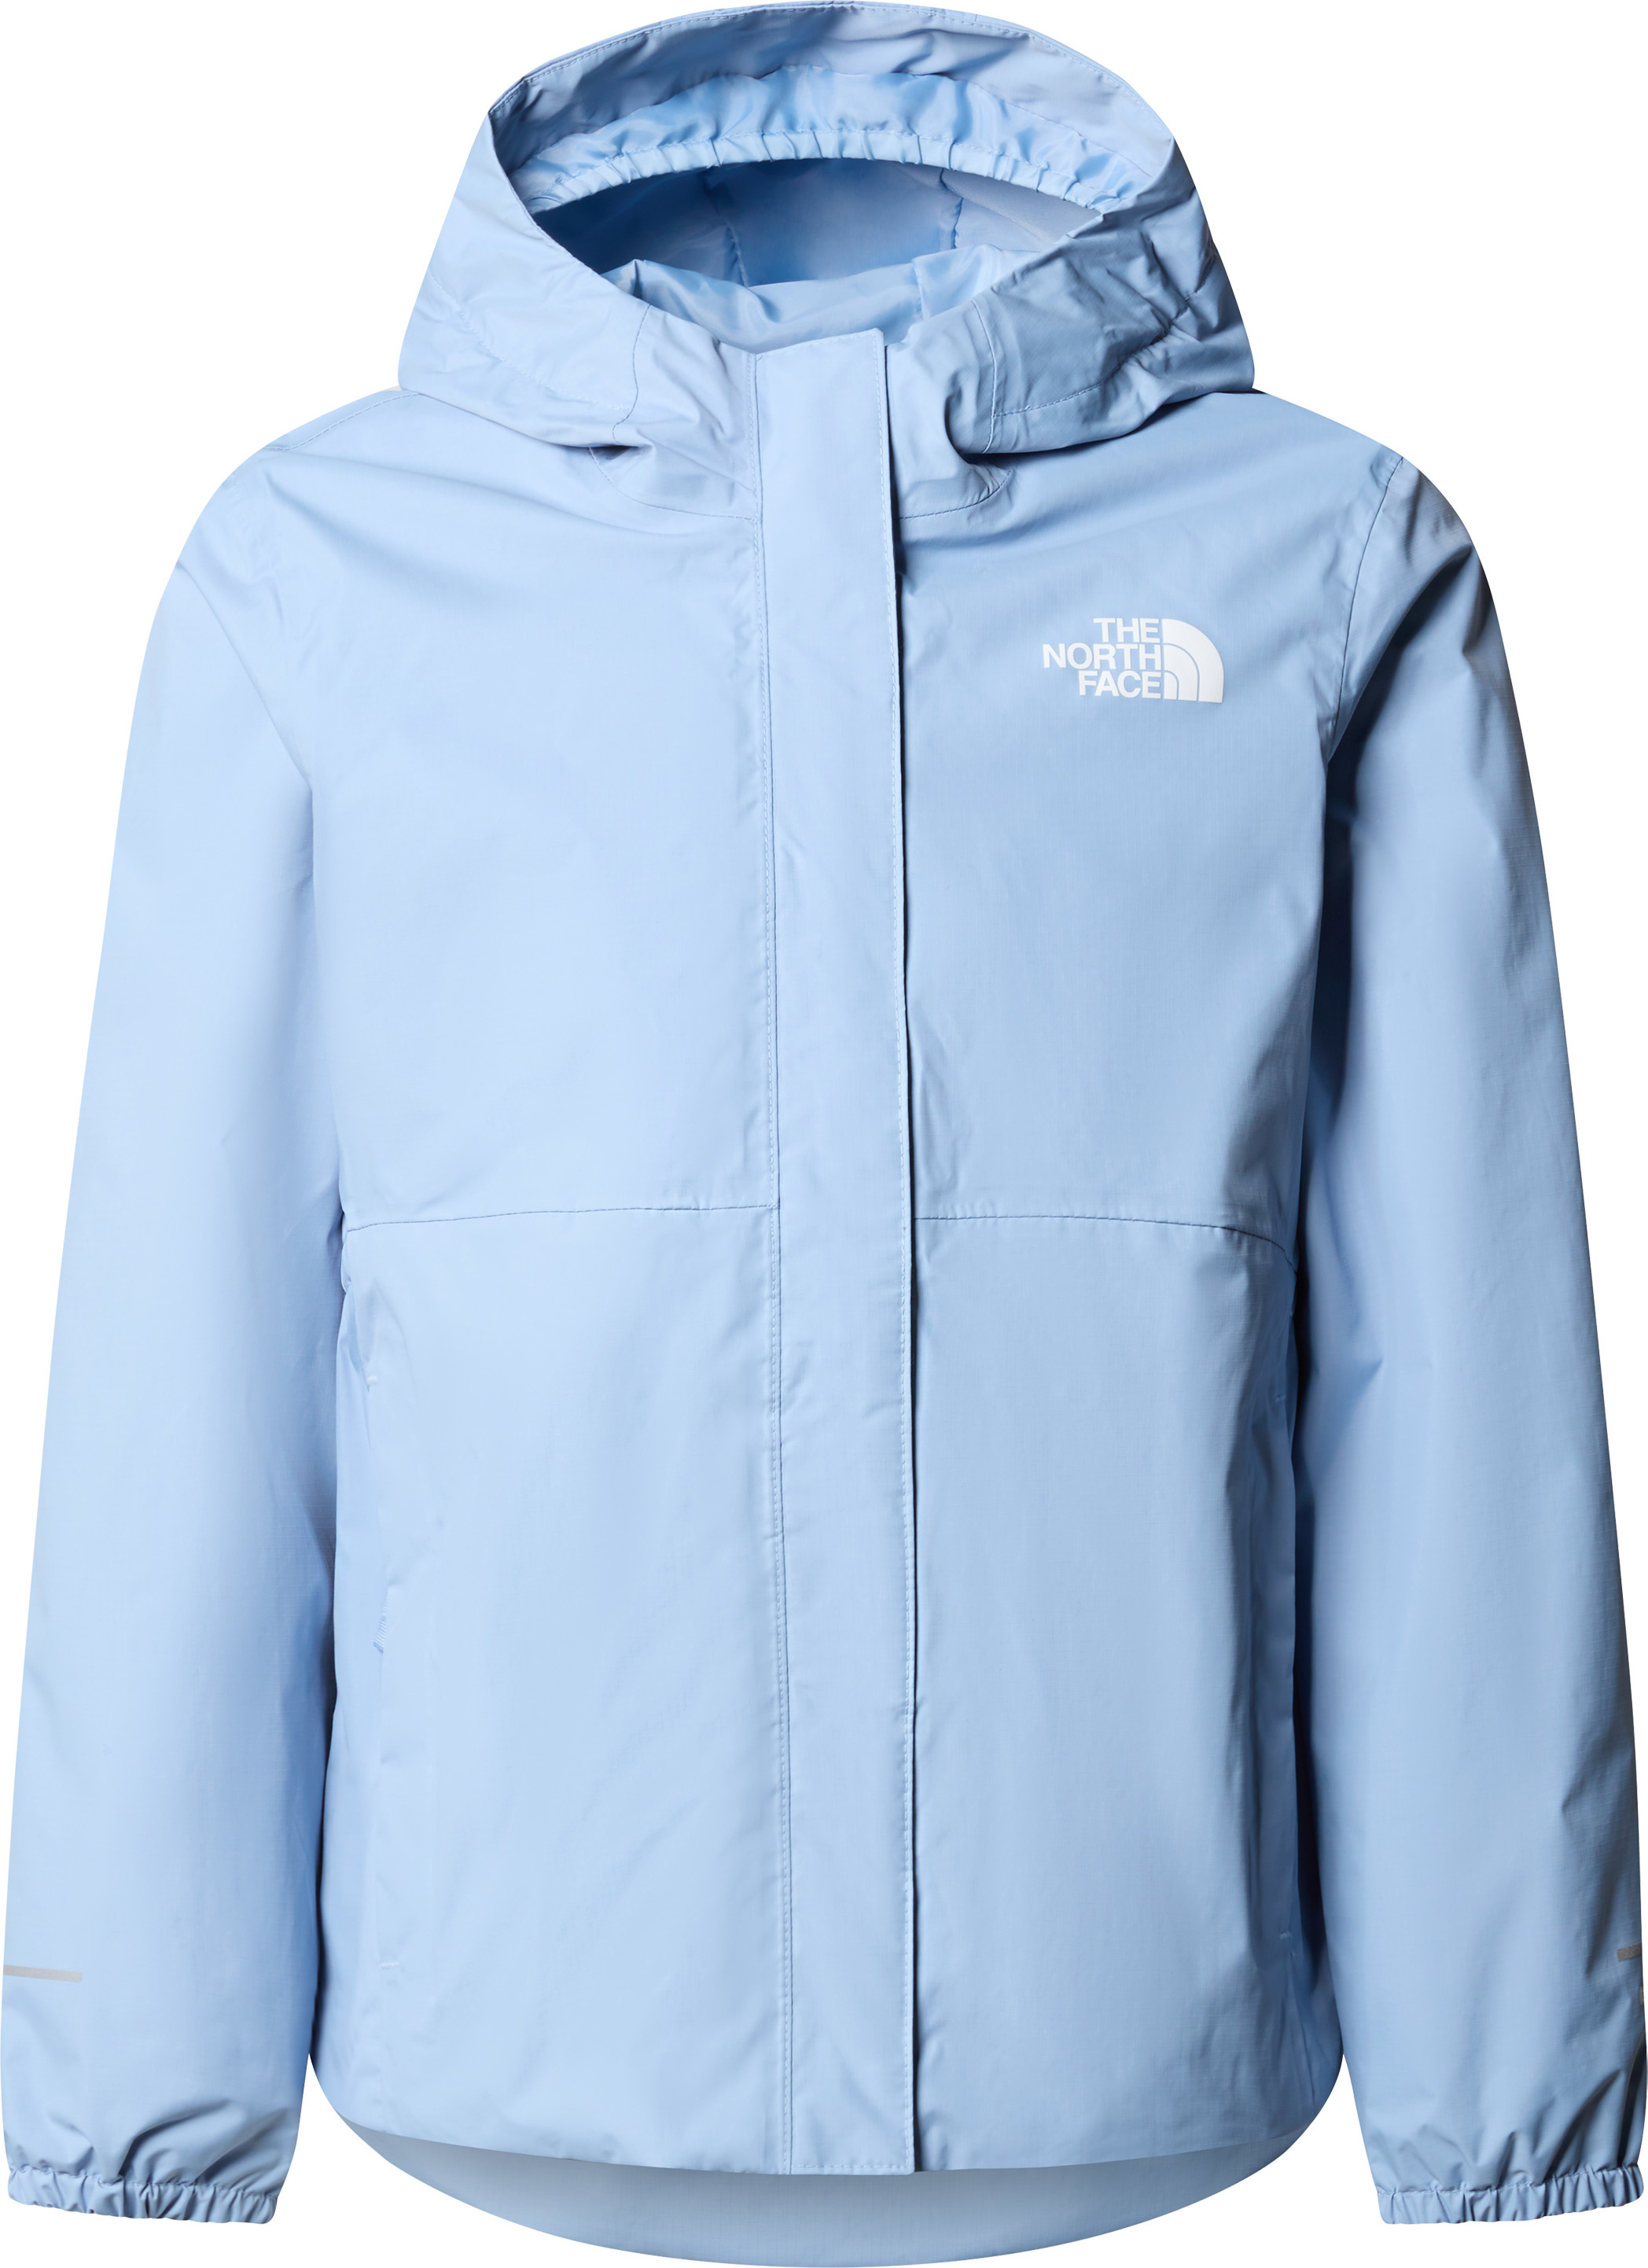 The North Face The North Face Girls' Antora Rain Jacket Steel Blue XL, Steel Blue